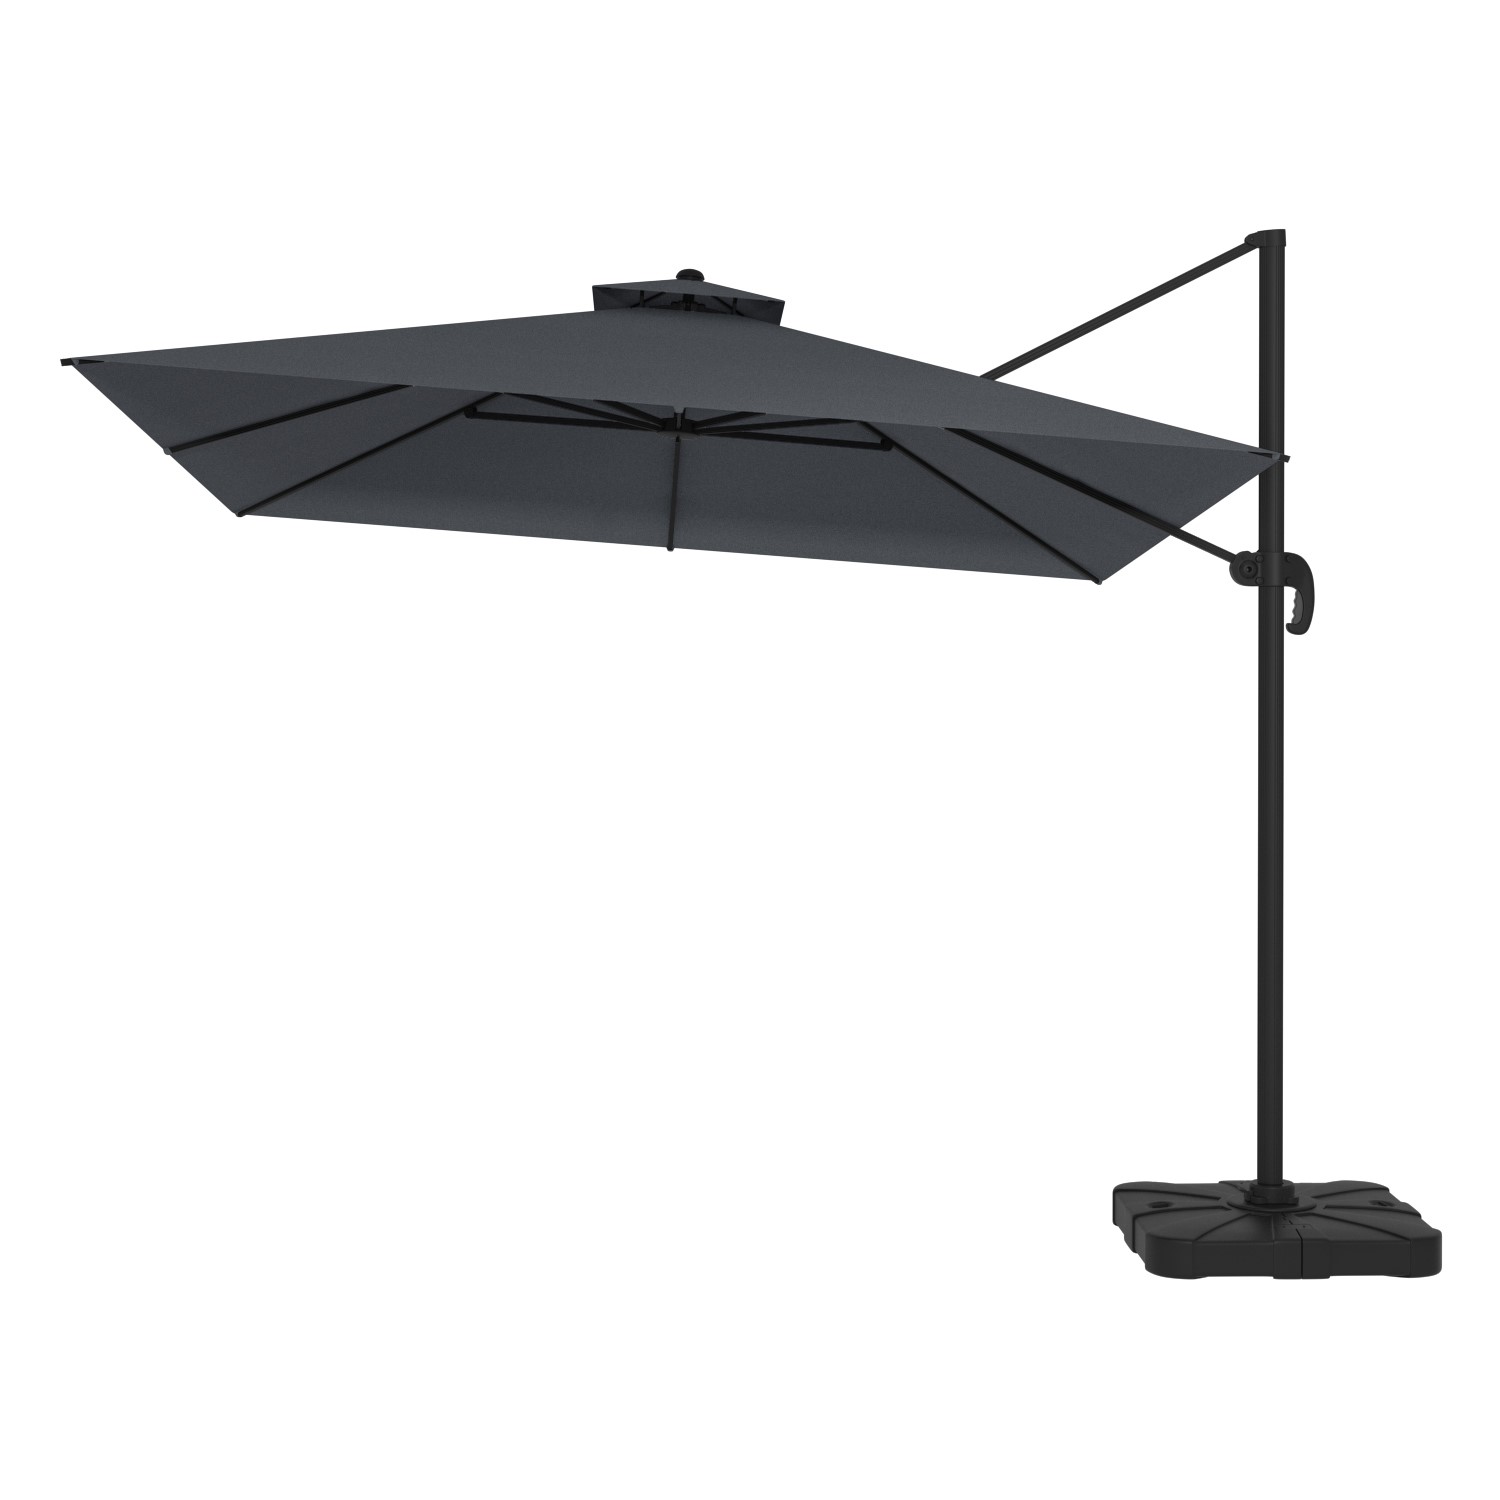 Read more about 3x3m dark grey square cantilever parasol with base & cover como